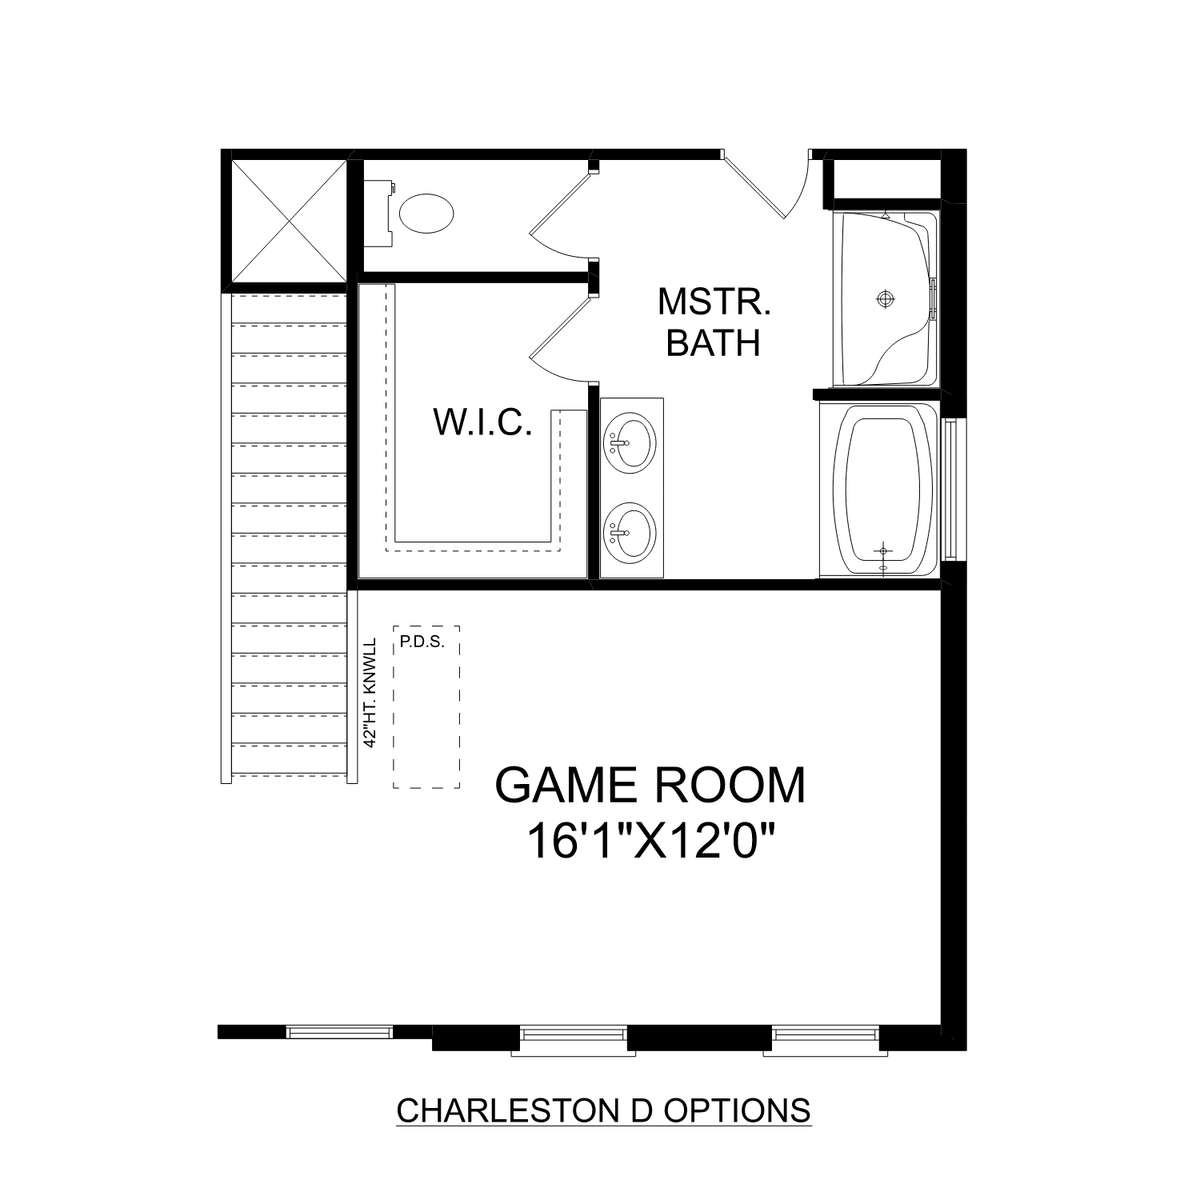 3 - The Charleston D buildable floor plan layout in Davidson Homes' Durham Farms community.